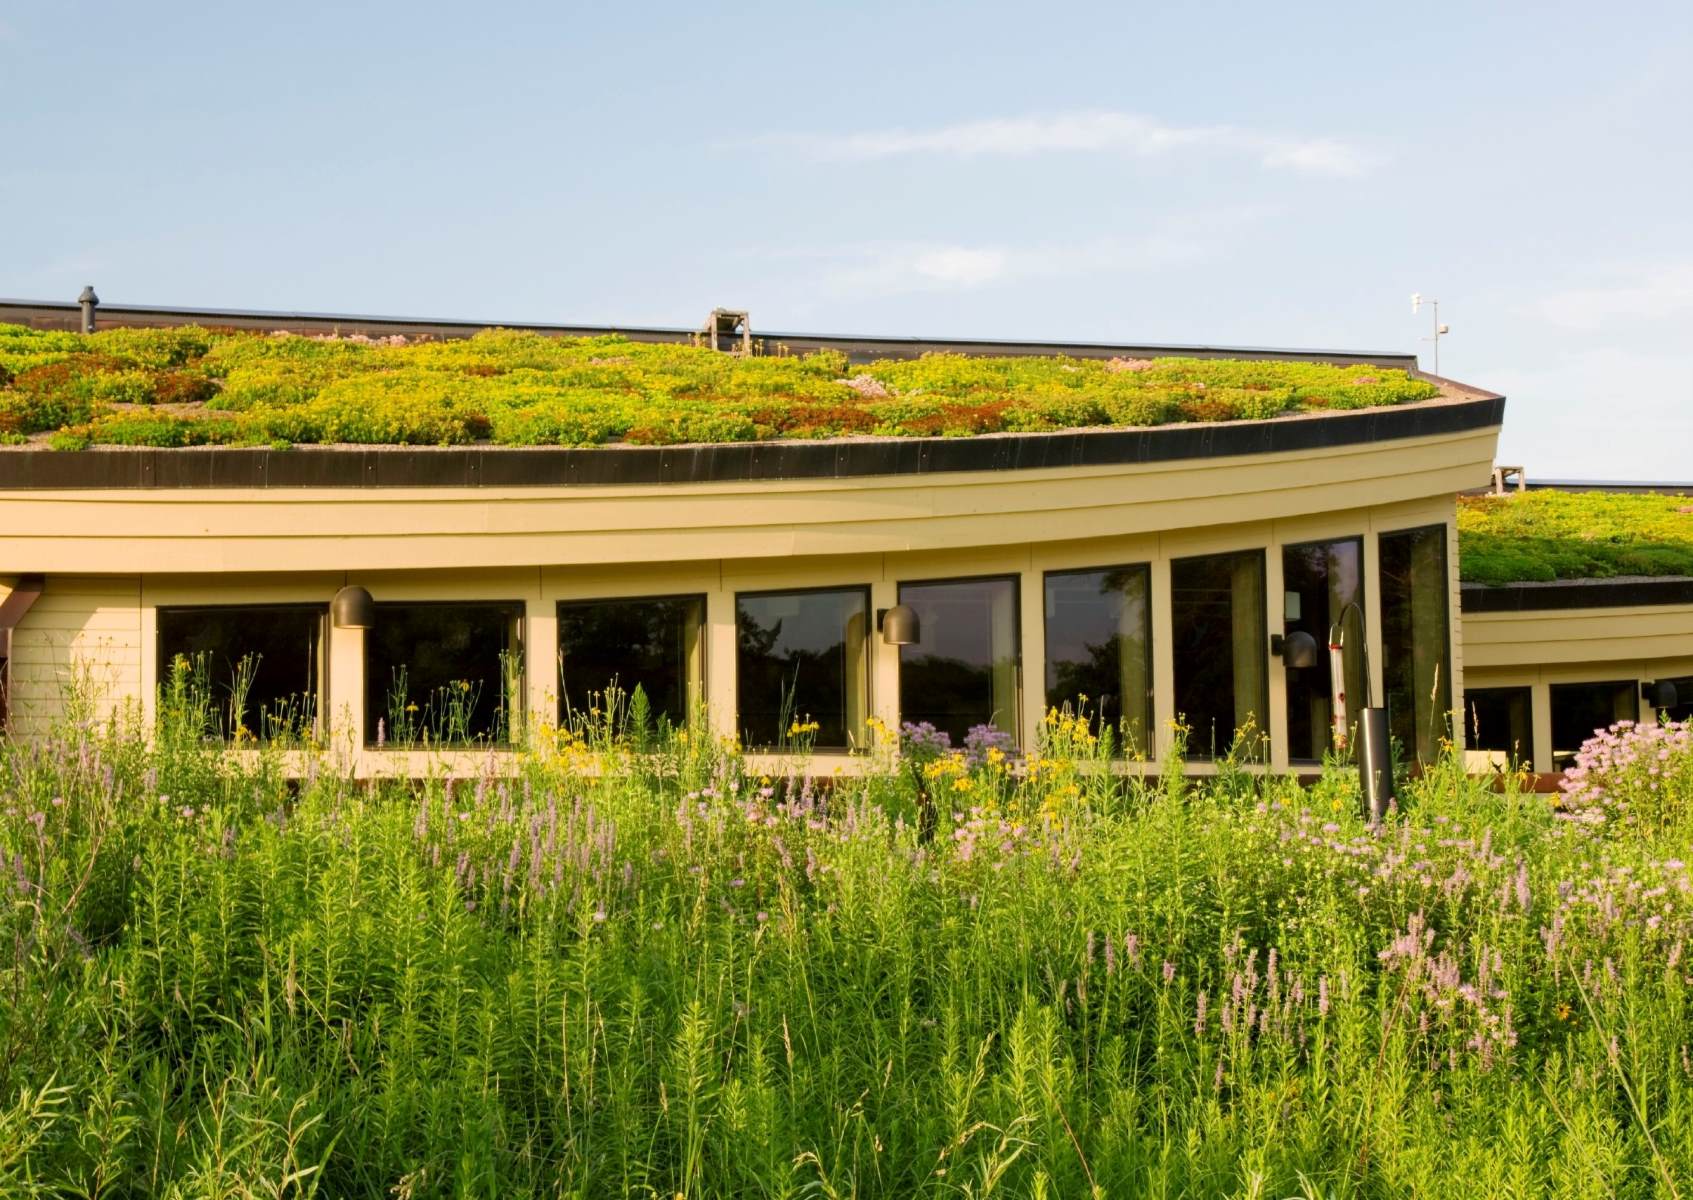 How To Design A Self-Sufficient Passive Active Solar Earth-Bermed House